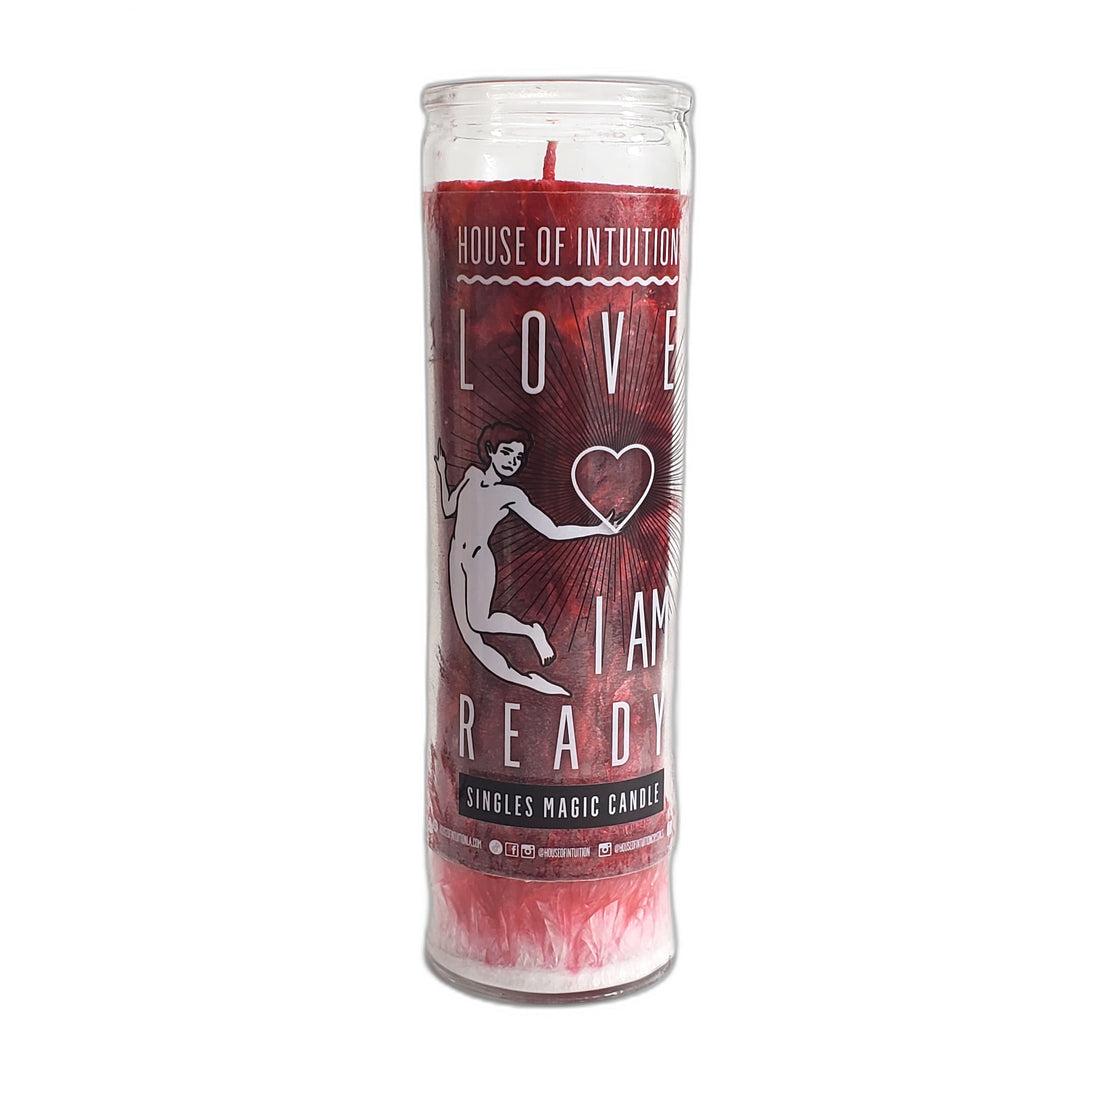 LOVE I'M READY Singles Magic Candle Limited Edition Candles House of Intuition 